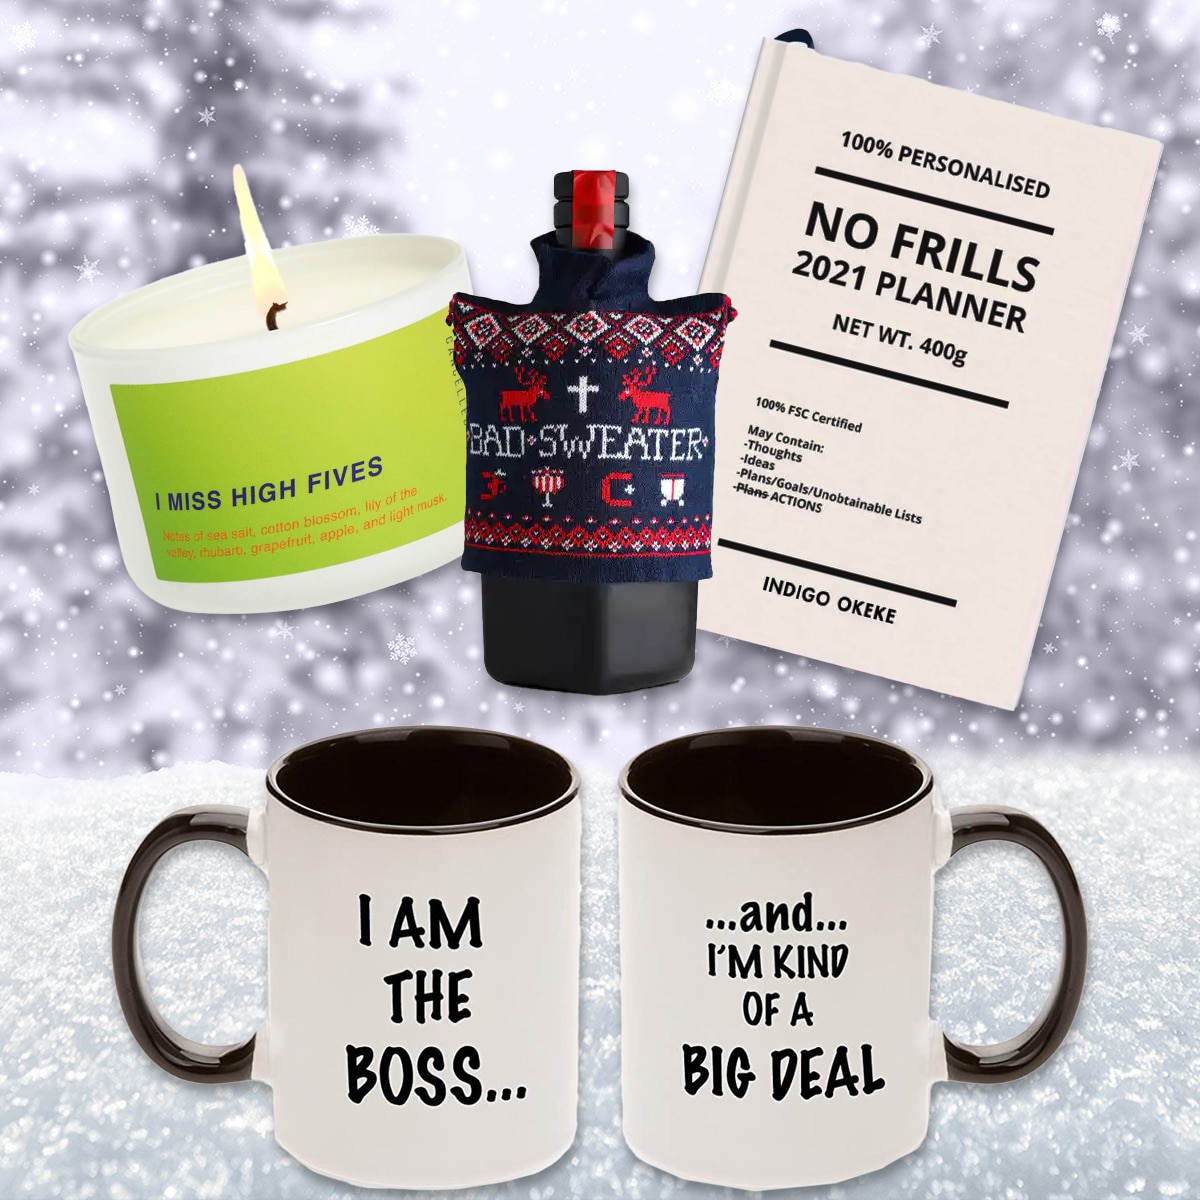 15 Best End of Year Employee Gift Ideas | Postal